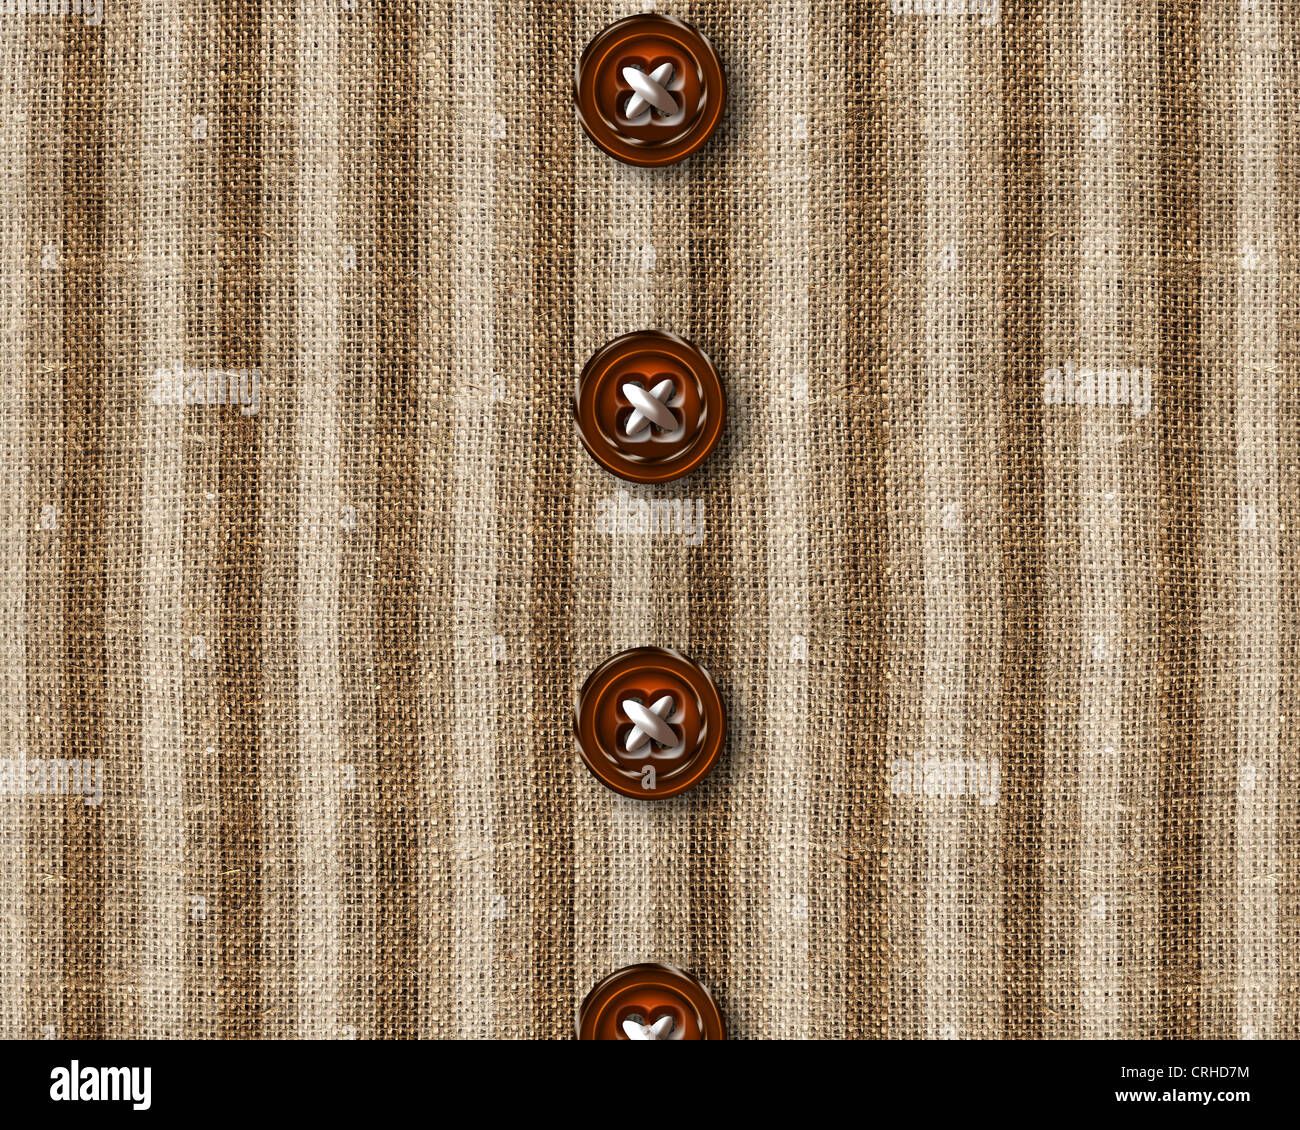 wooden Cloth buttons on brown shirt. Stock Photo